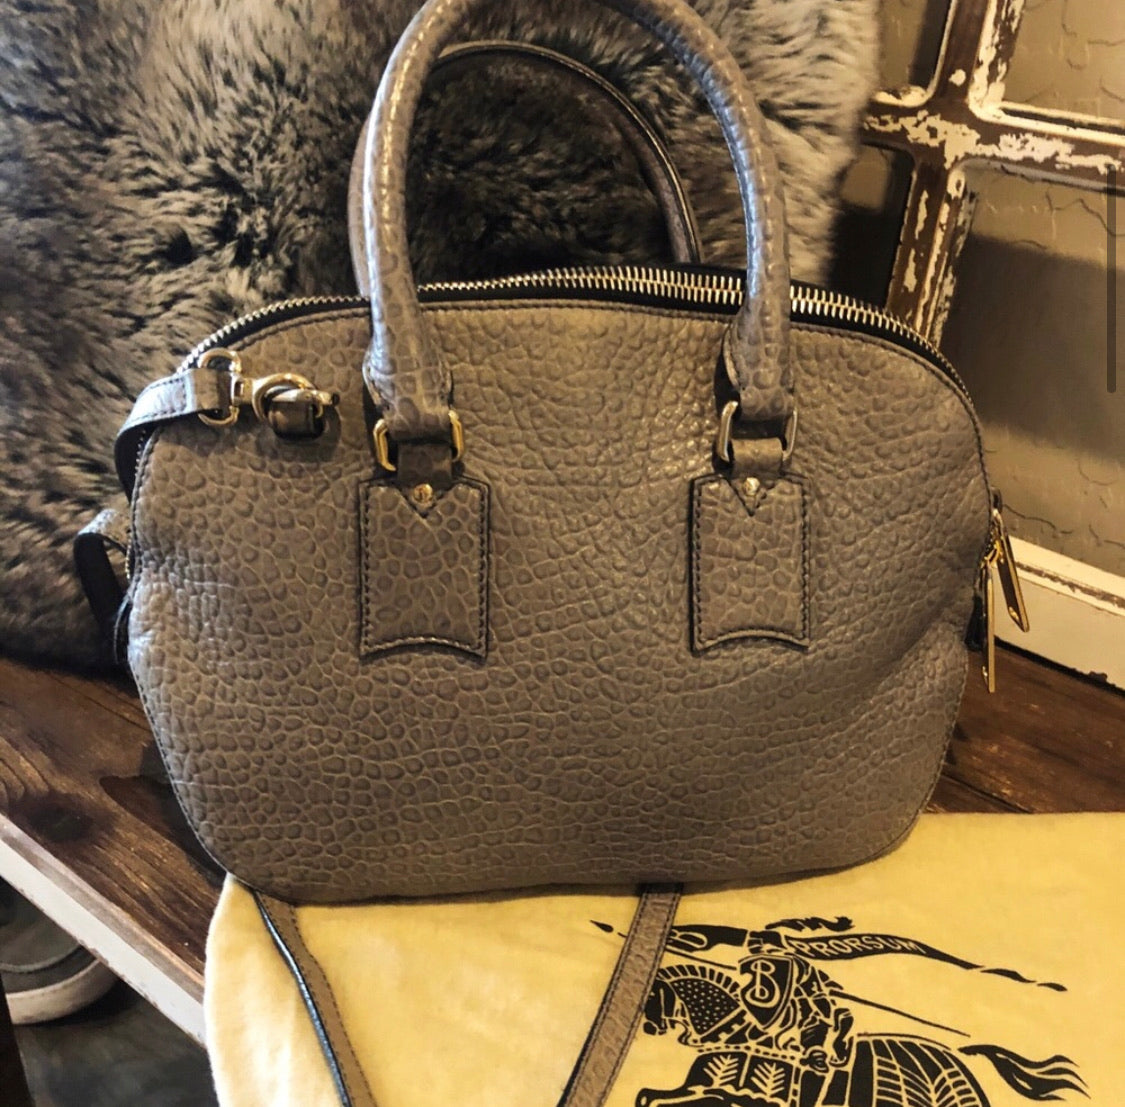 Burberry Orchard Pebbled Leather Heritage Bag